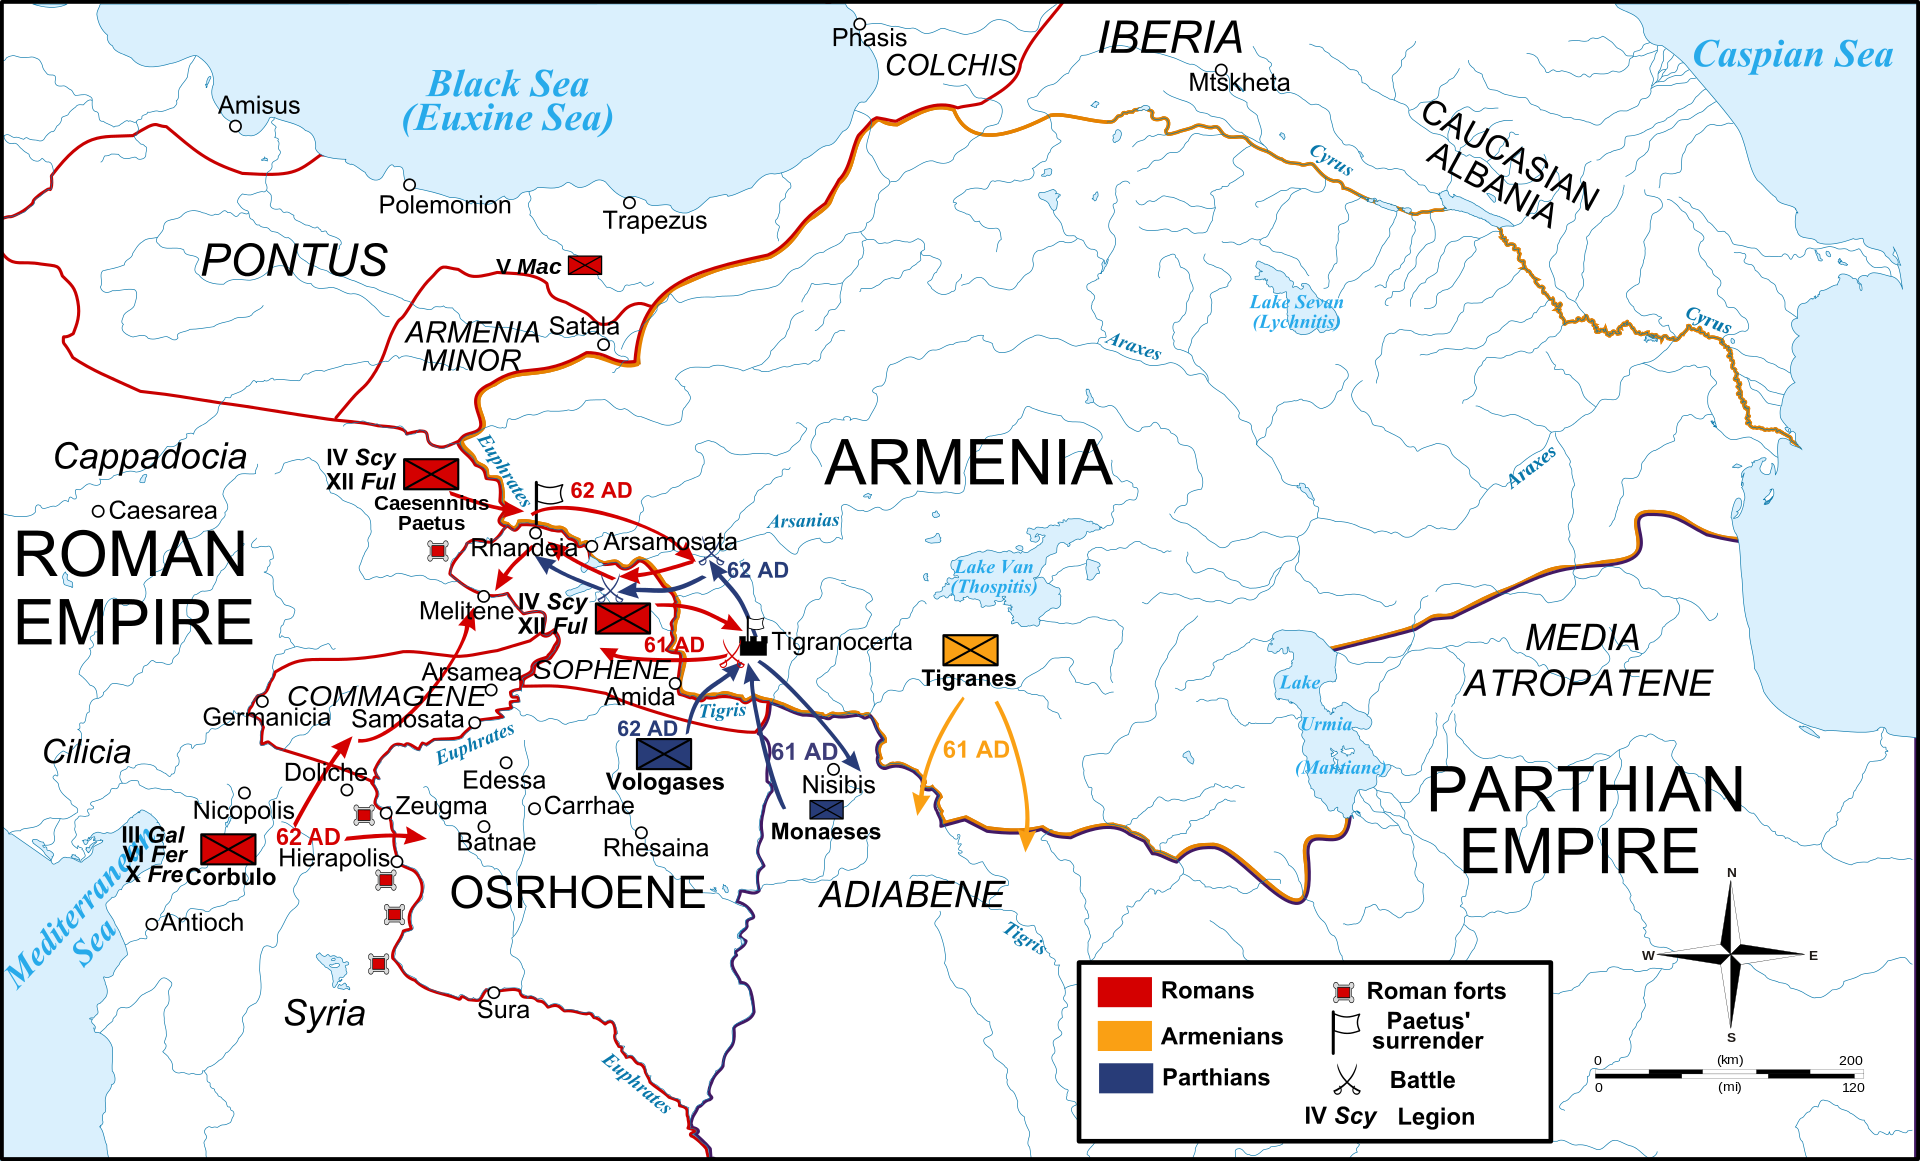 Operations during the final years of the war: the raids of Tigranes into Parthian territory provoked a Parthian counterattack, which culminated in the surrender of the Roman army of L. Caesennius Paetus.